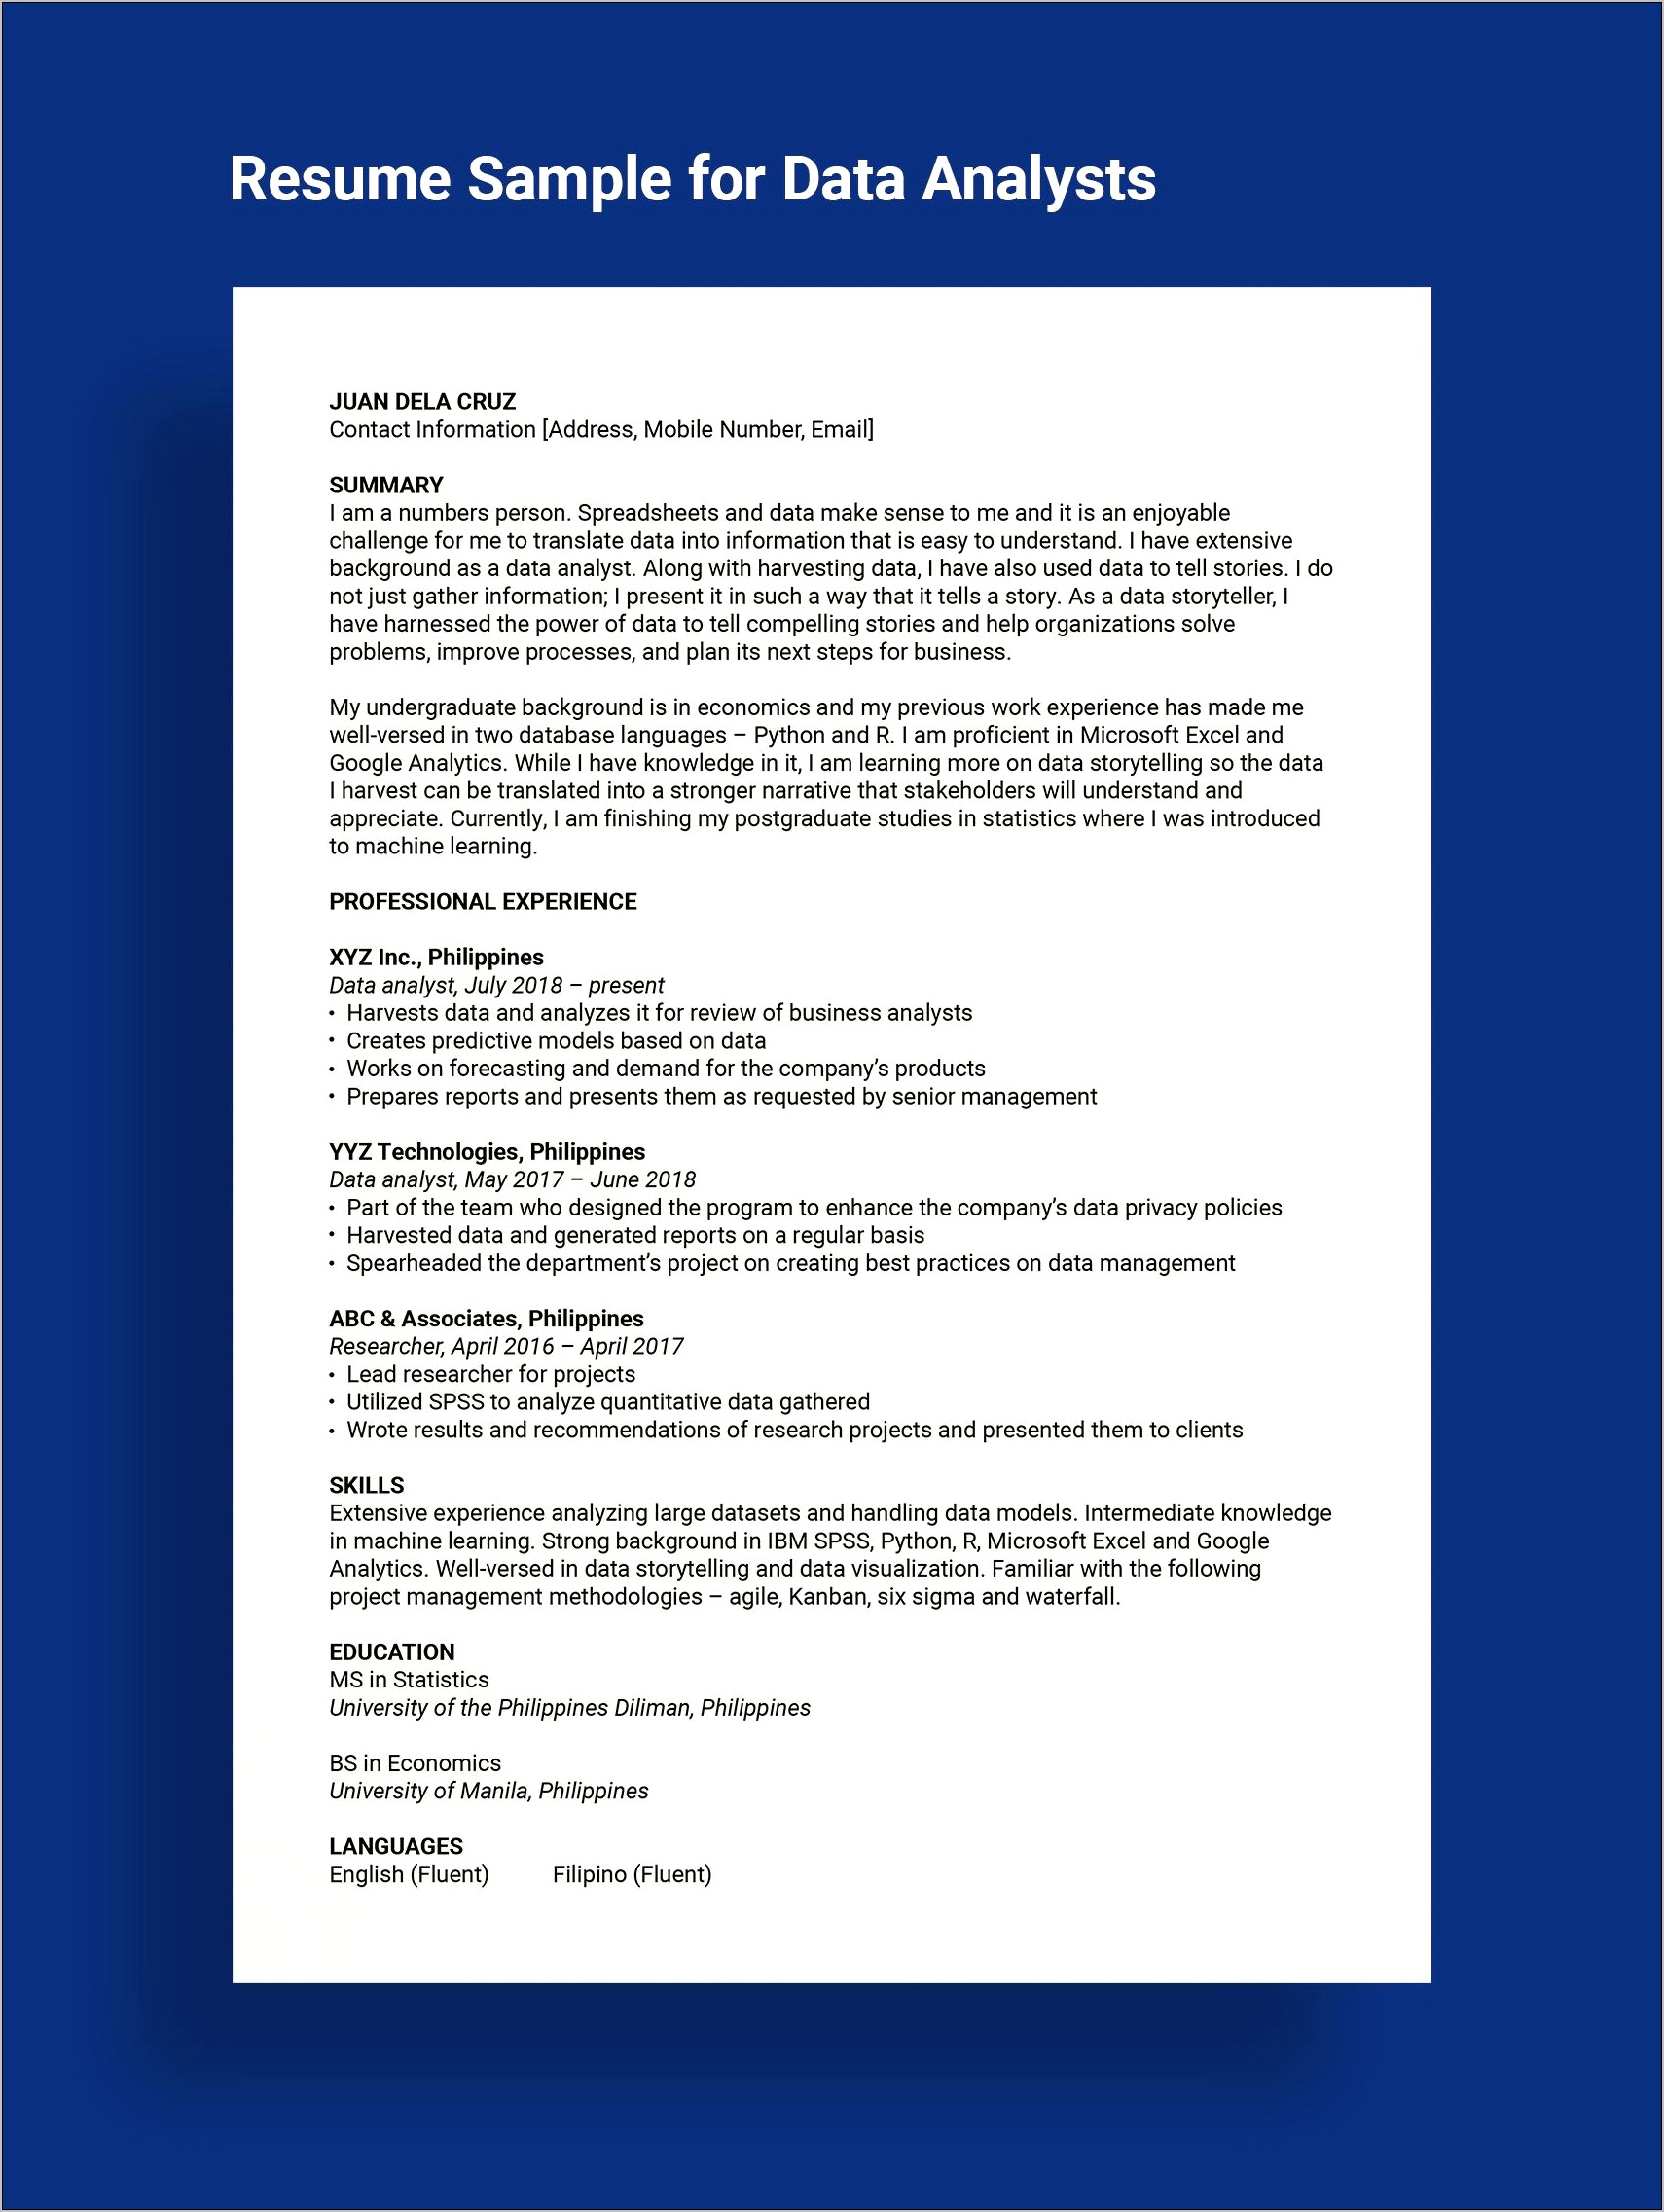 Examples Of A Research Analyst Objective Resume